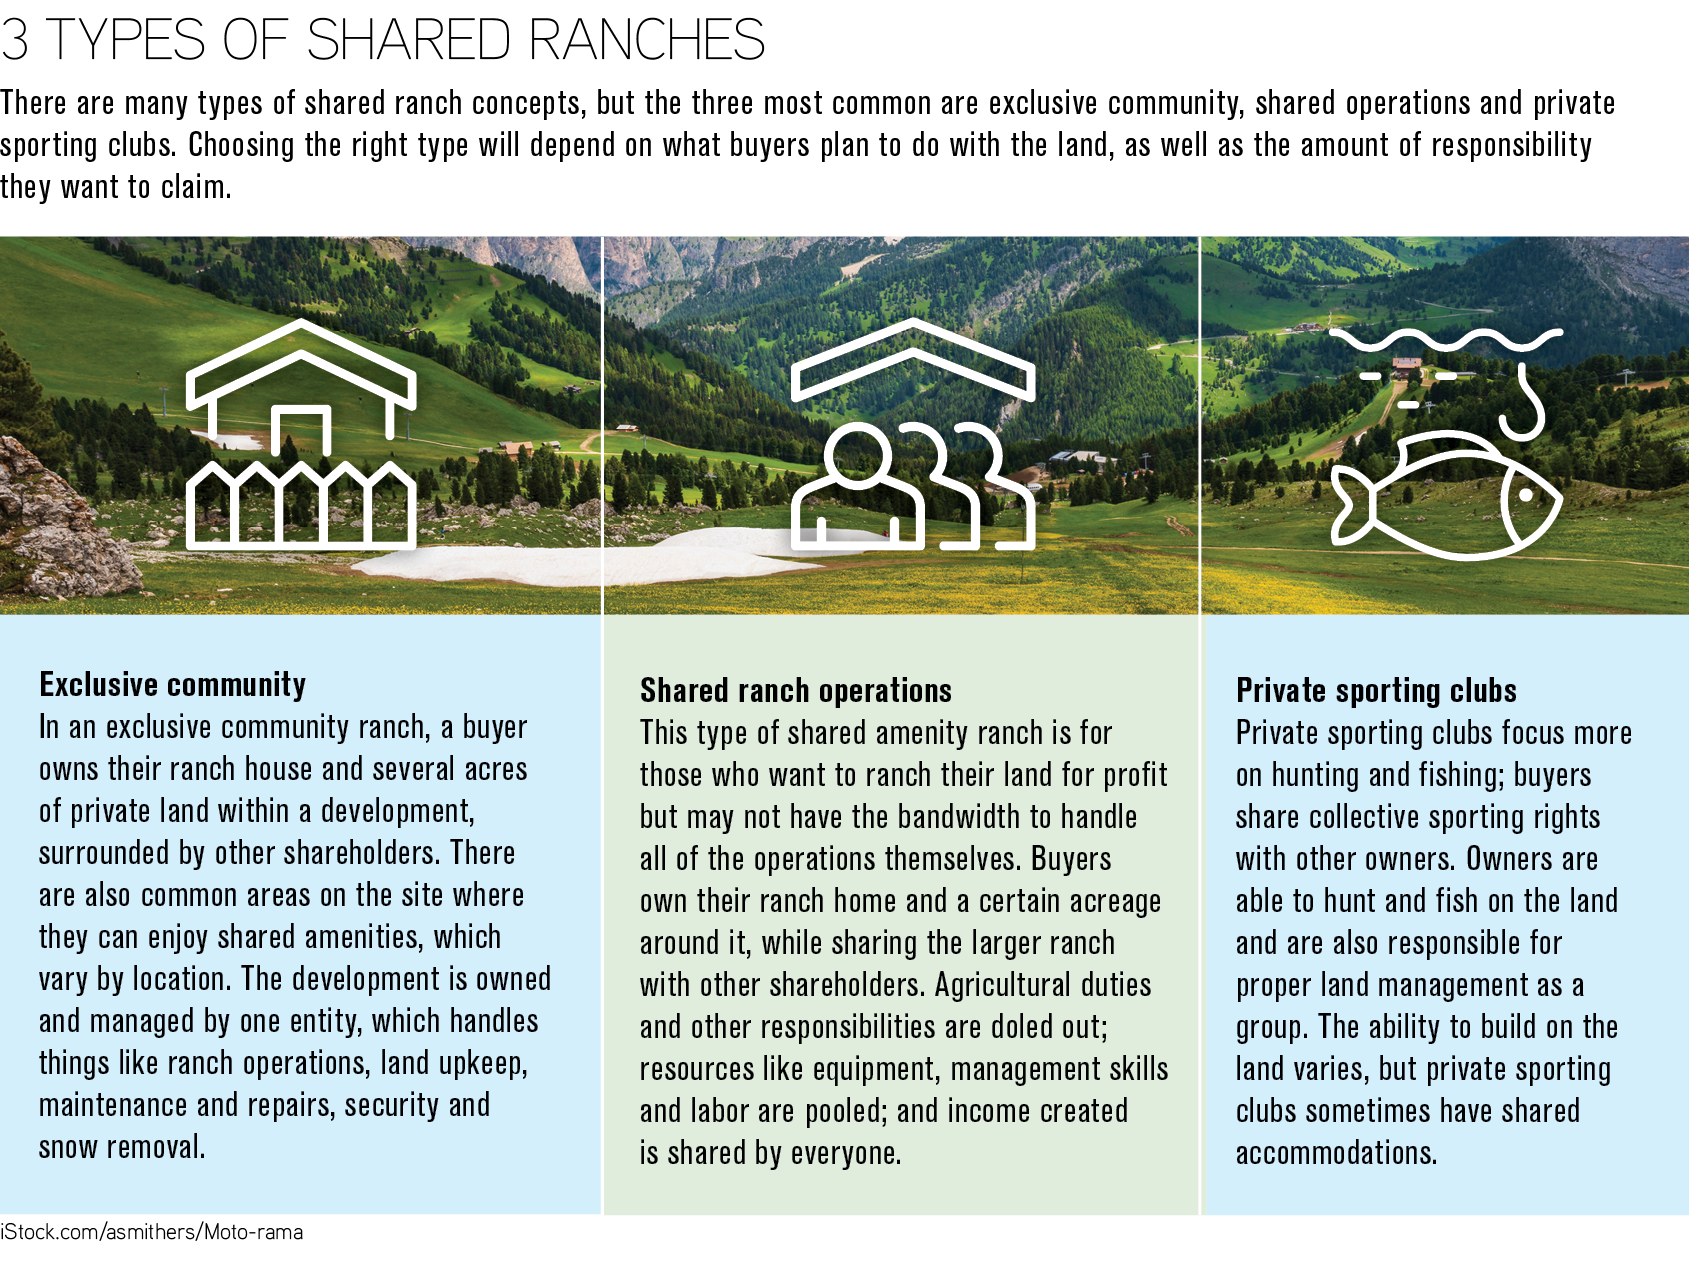 3 types of shared ranches